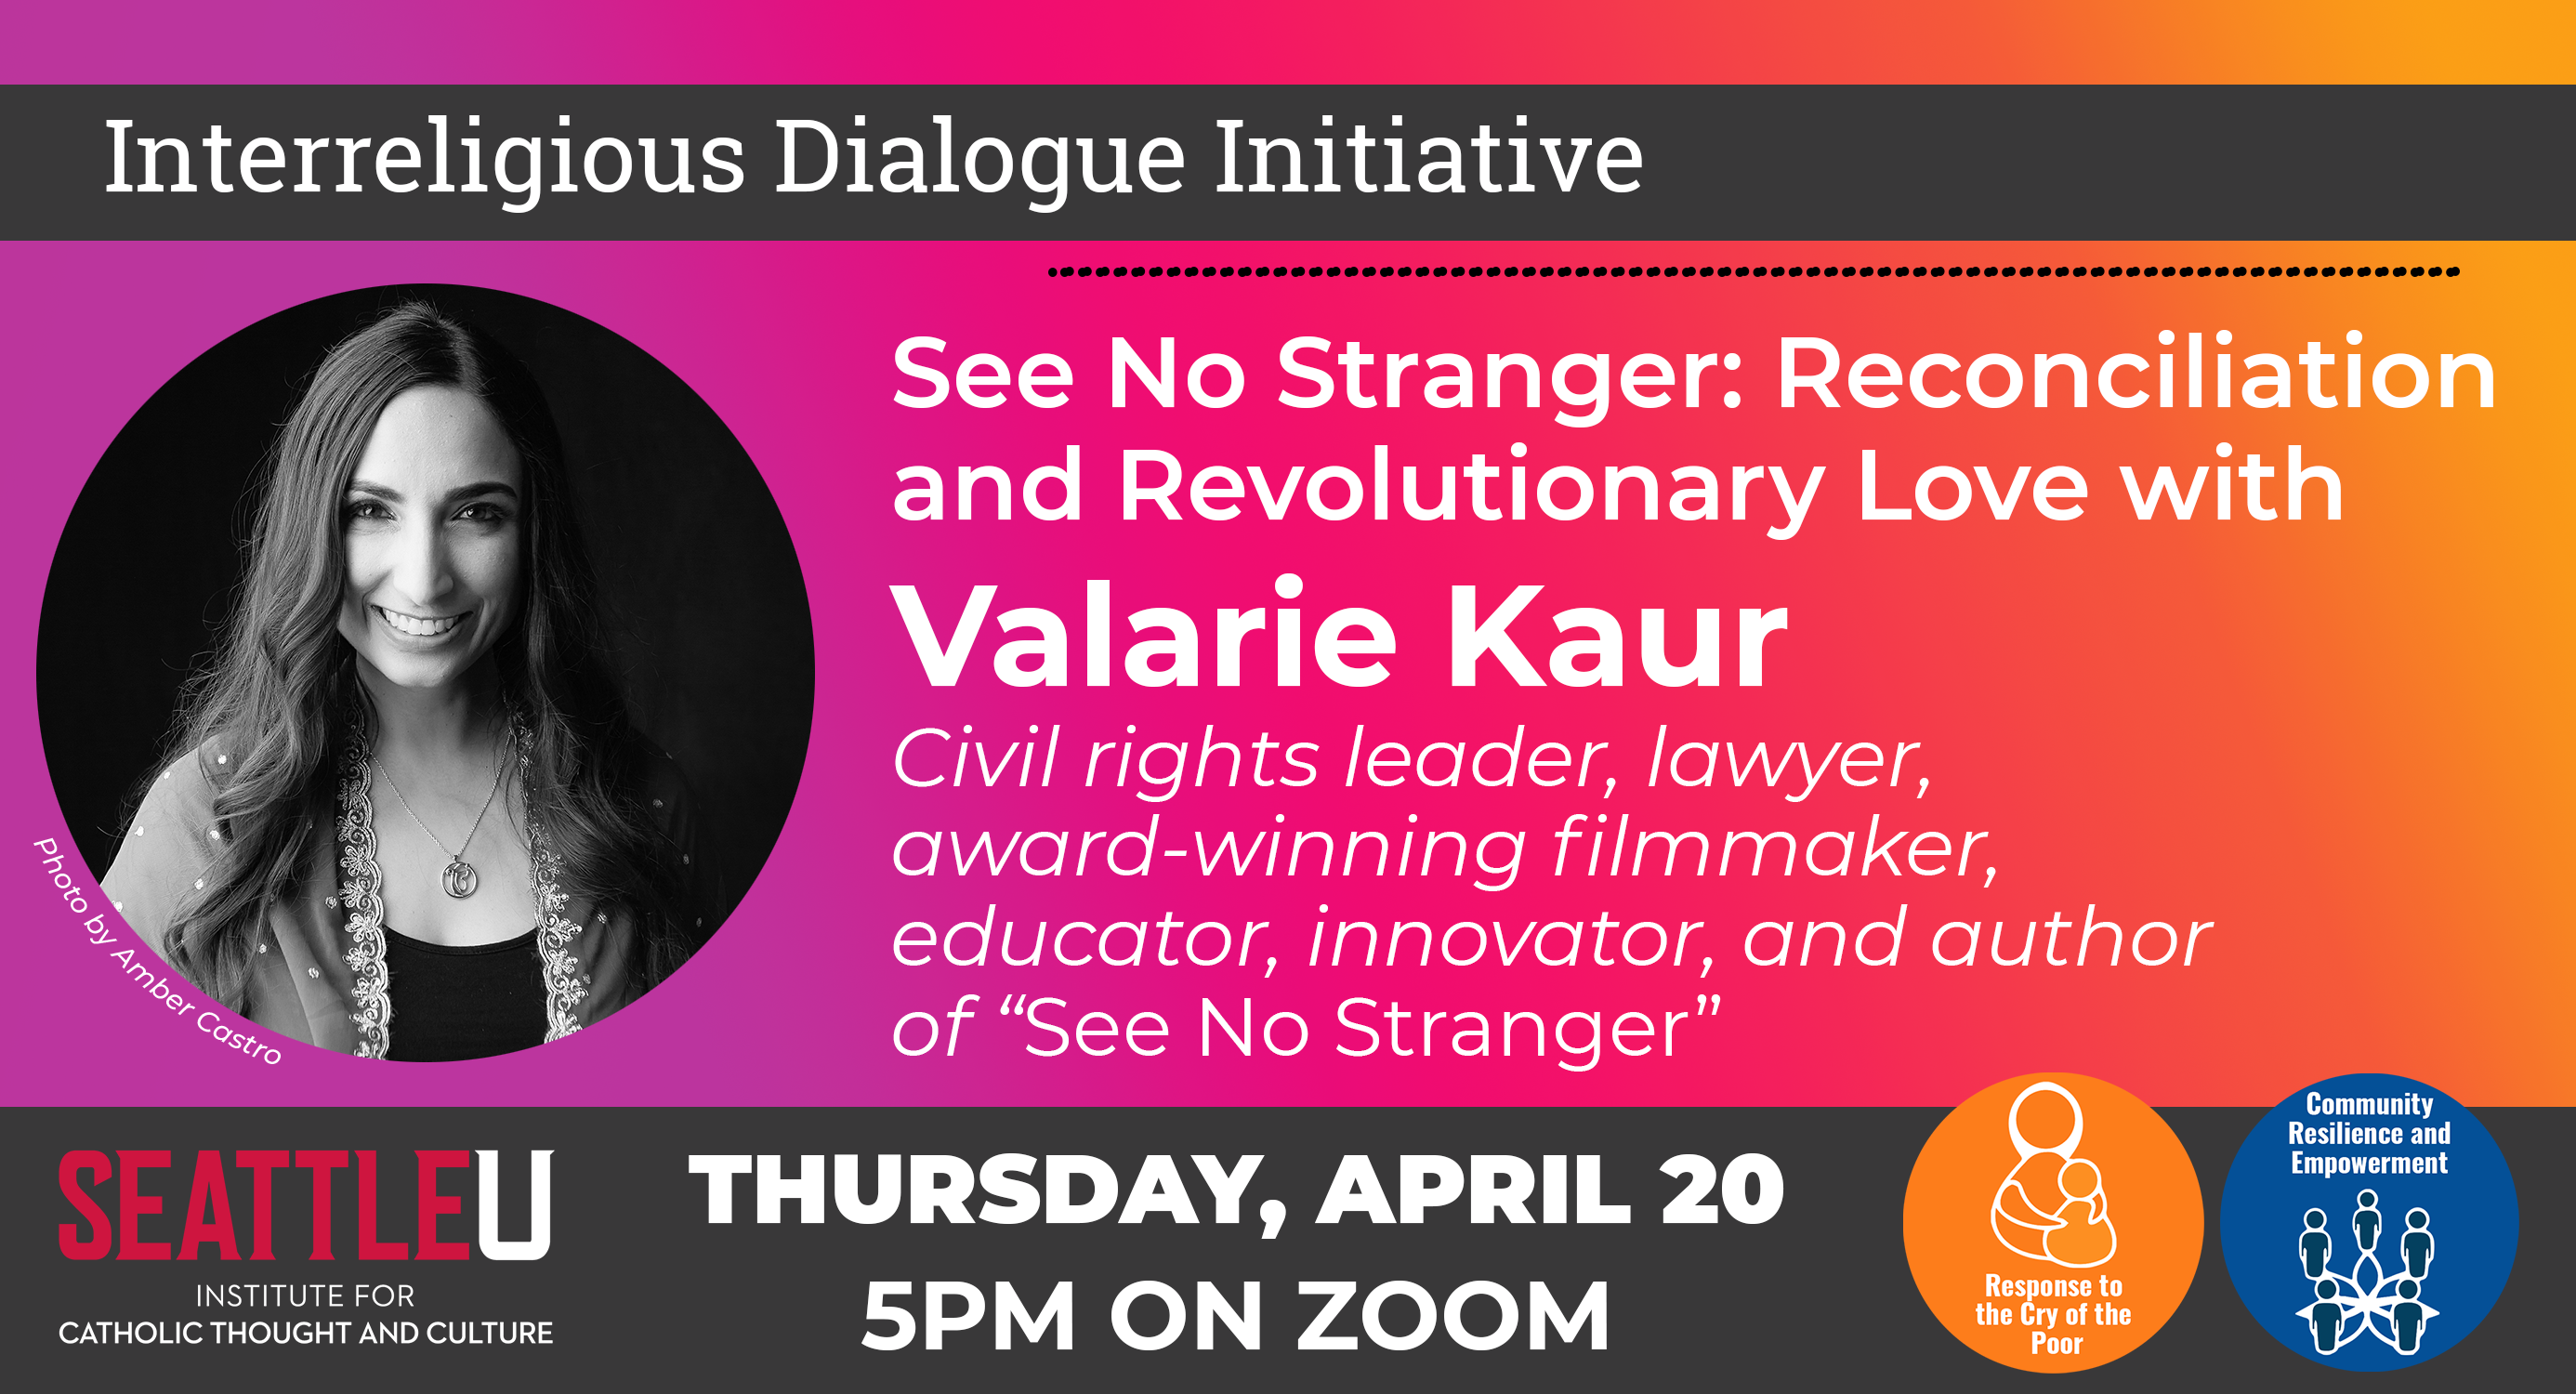 Flyer of event. Background color is a gradient from left to right of fuchsia, red, and orange. On the right of the flyer, there is a black and white photography of Valarie Kaur, she has long straight hair with waves at the ends, she is smiling and looking directly to the camera, she has black shirt with a lighter sweater on top. On the right side of the flyer, there is information about the event